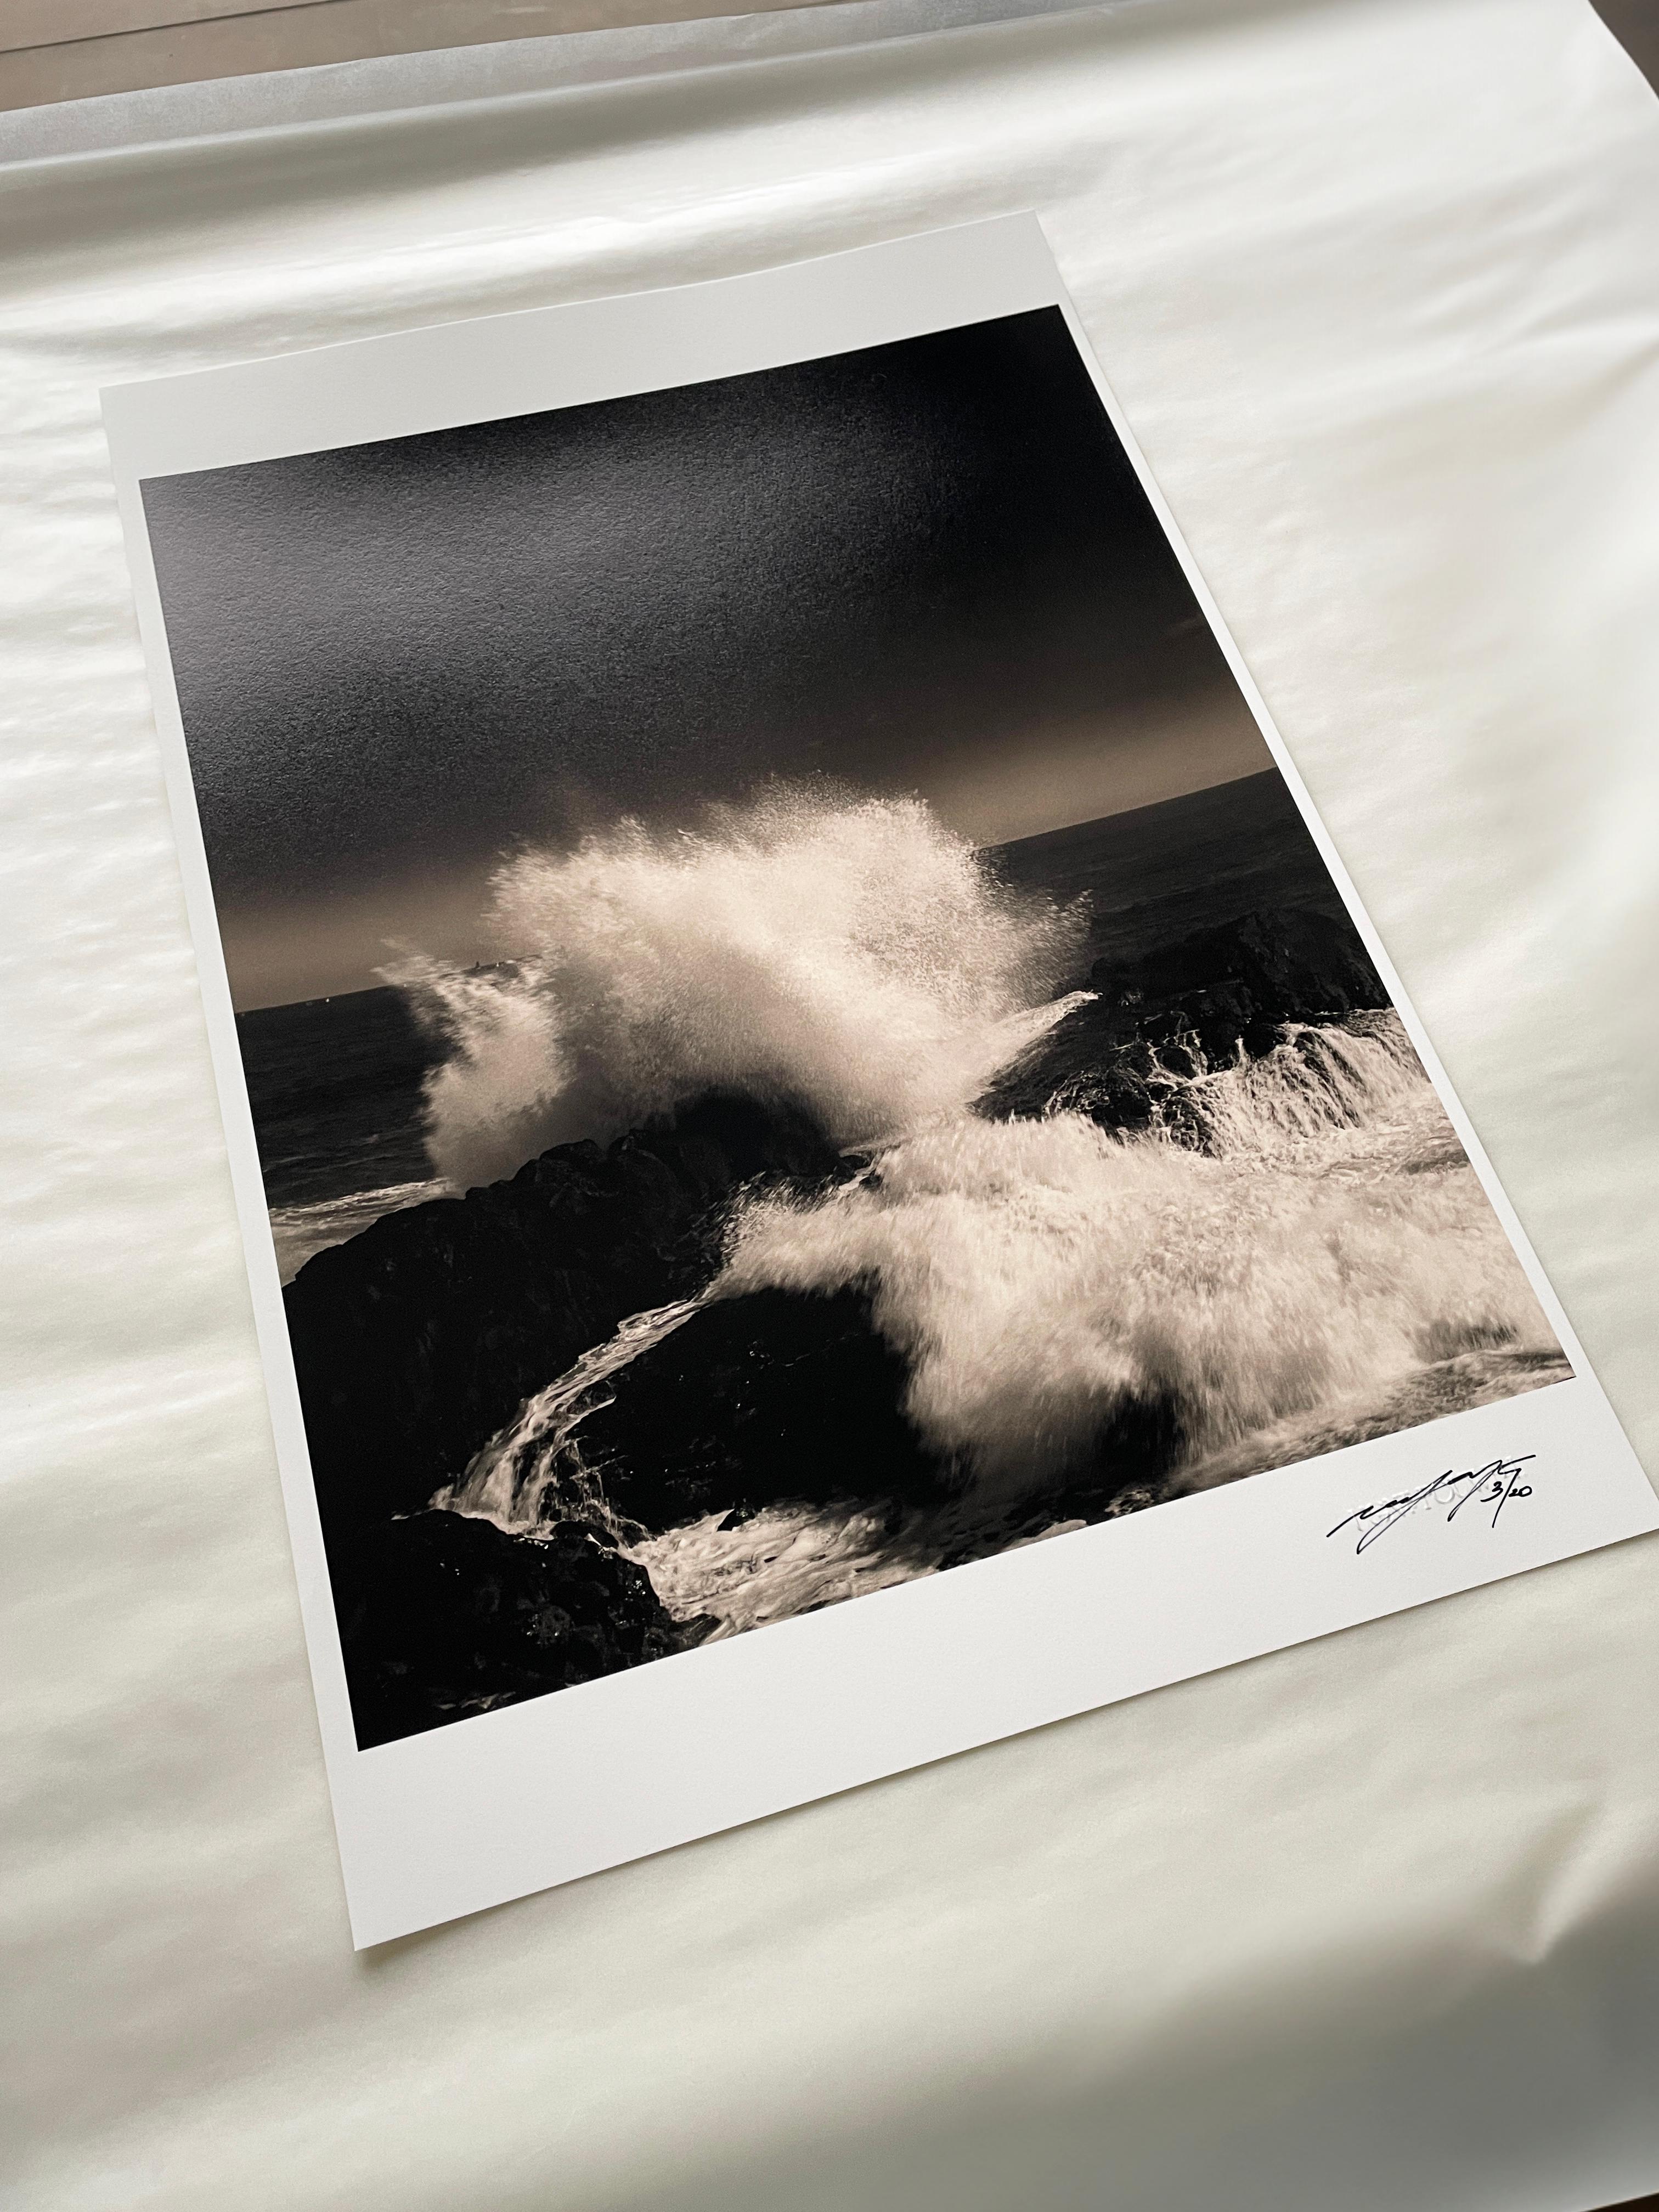 'Crash'

Porto, Portugal 2022

Limited edition of 20.

rinted on Hahnemühle Photo Rag fine art paper.

The photograph is signed front and back and comes with a Certificate of Authenticity.

Carefully placed in a secure cardboard package and shipped